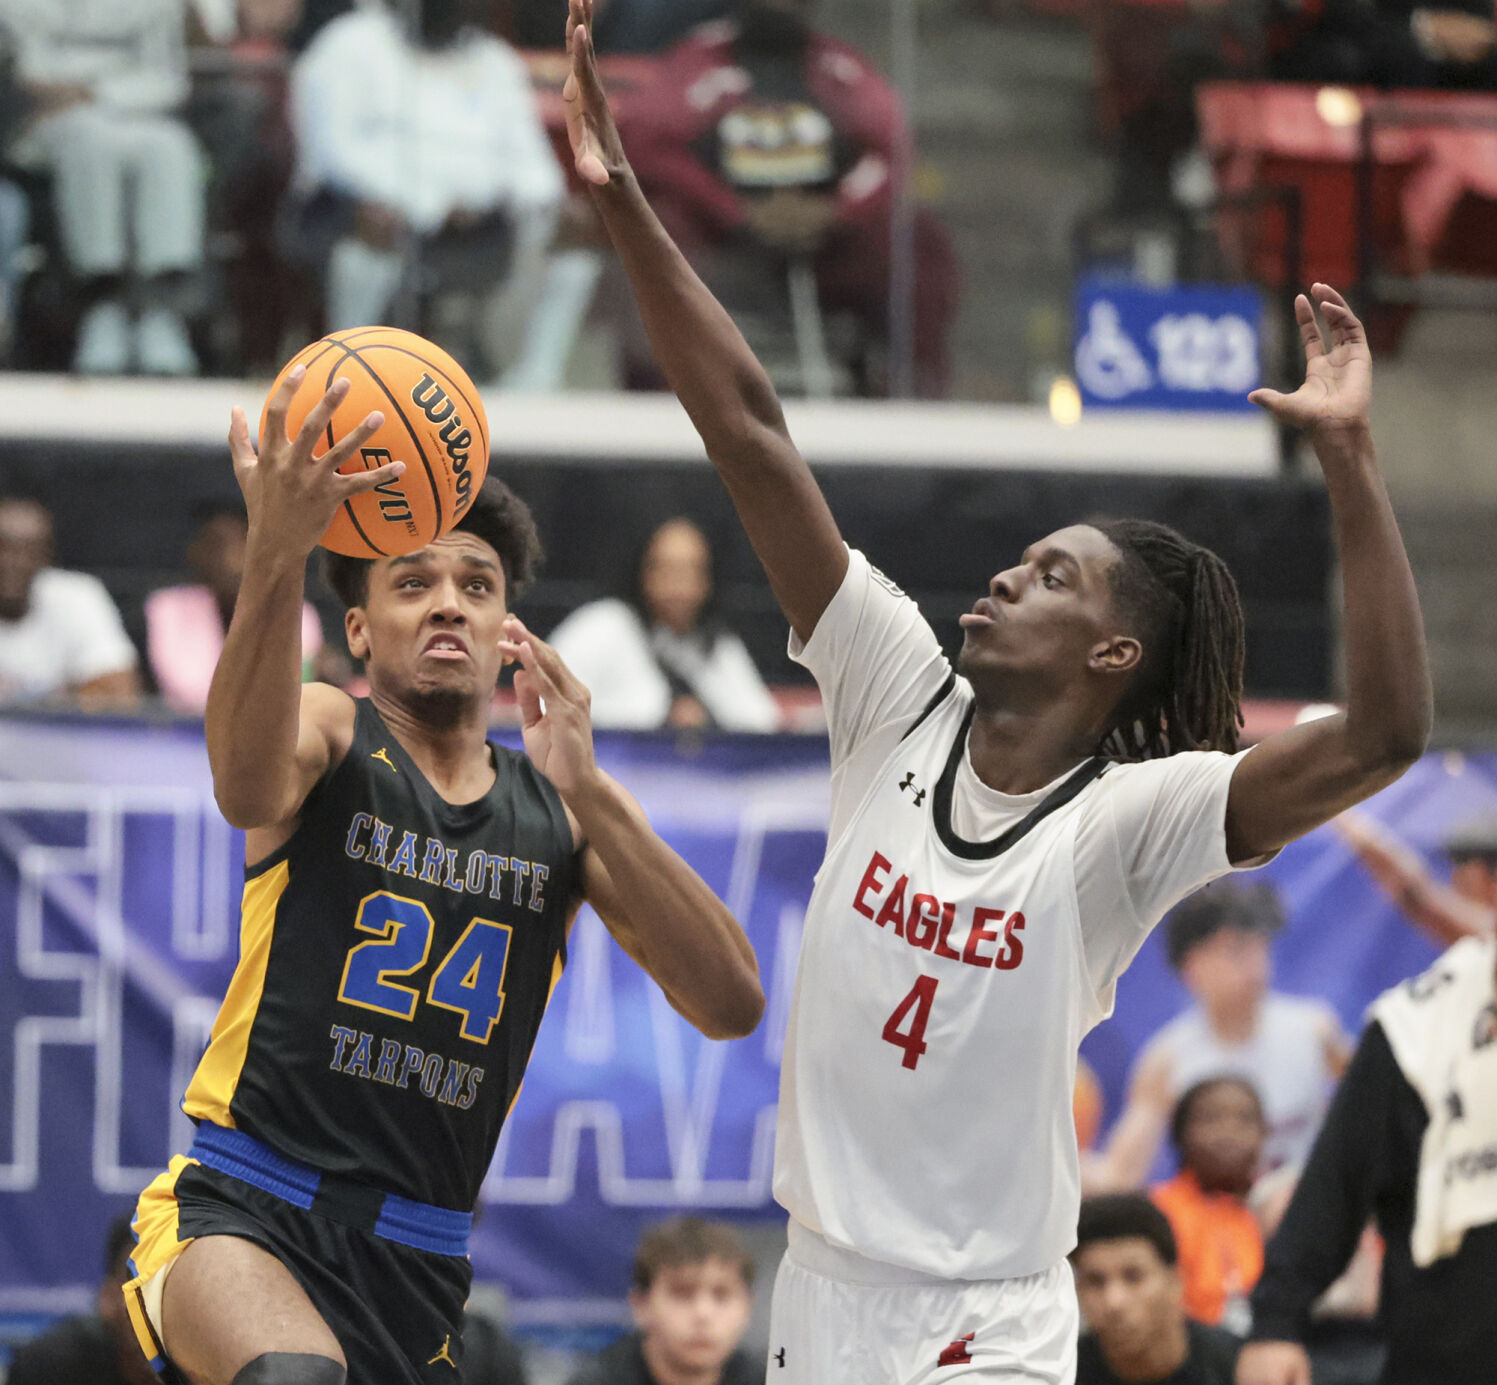 Charlotte High boys basketball faces tough setback at City of Palms Classic, but optimism prevails